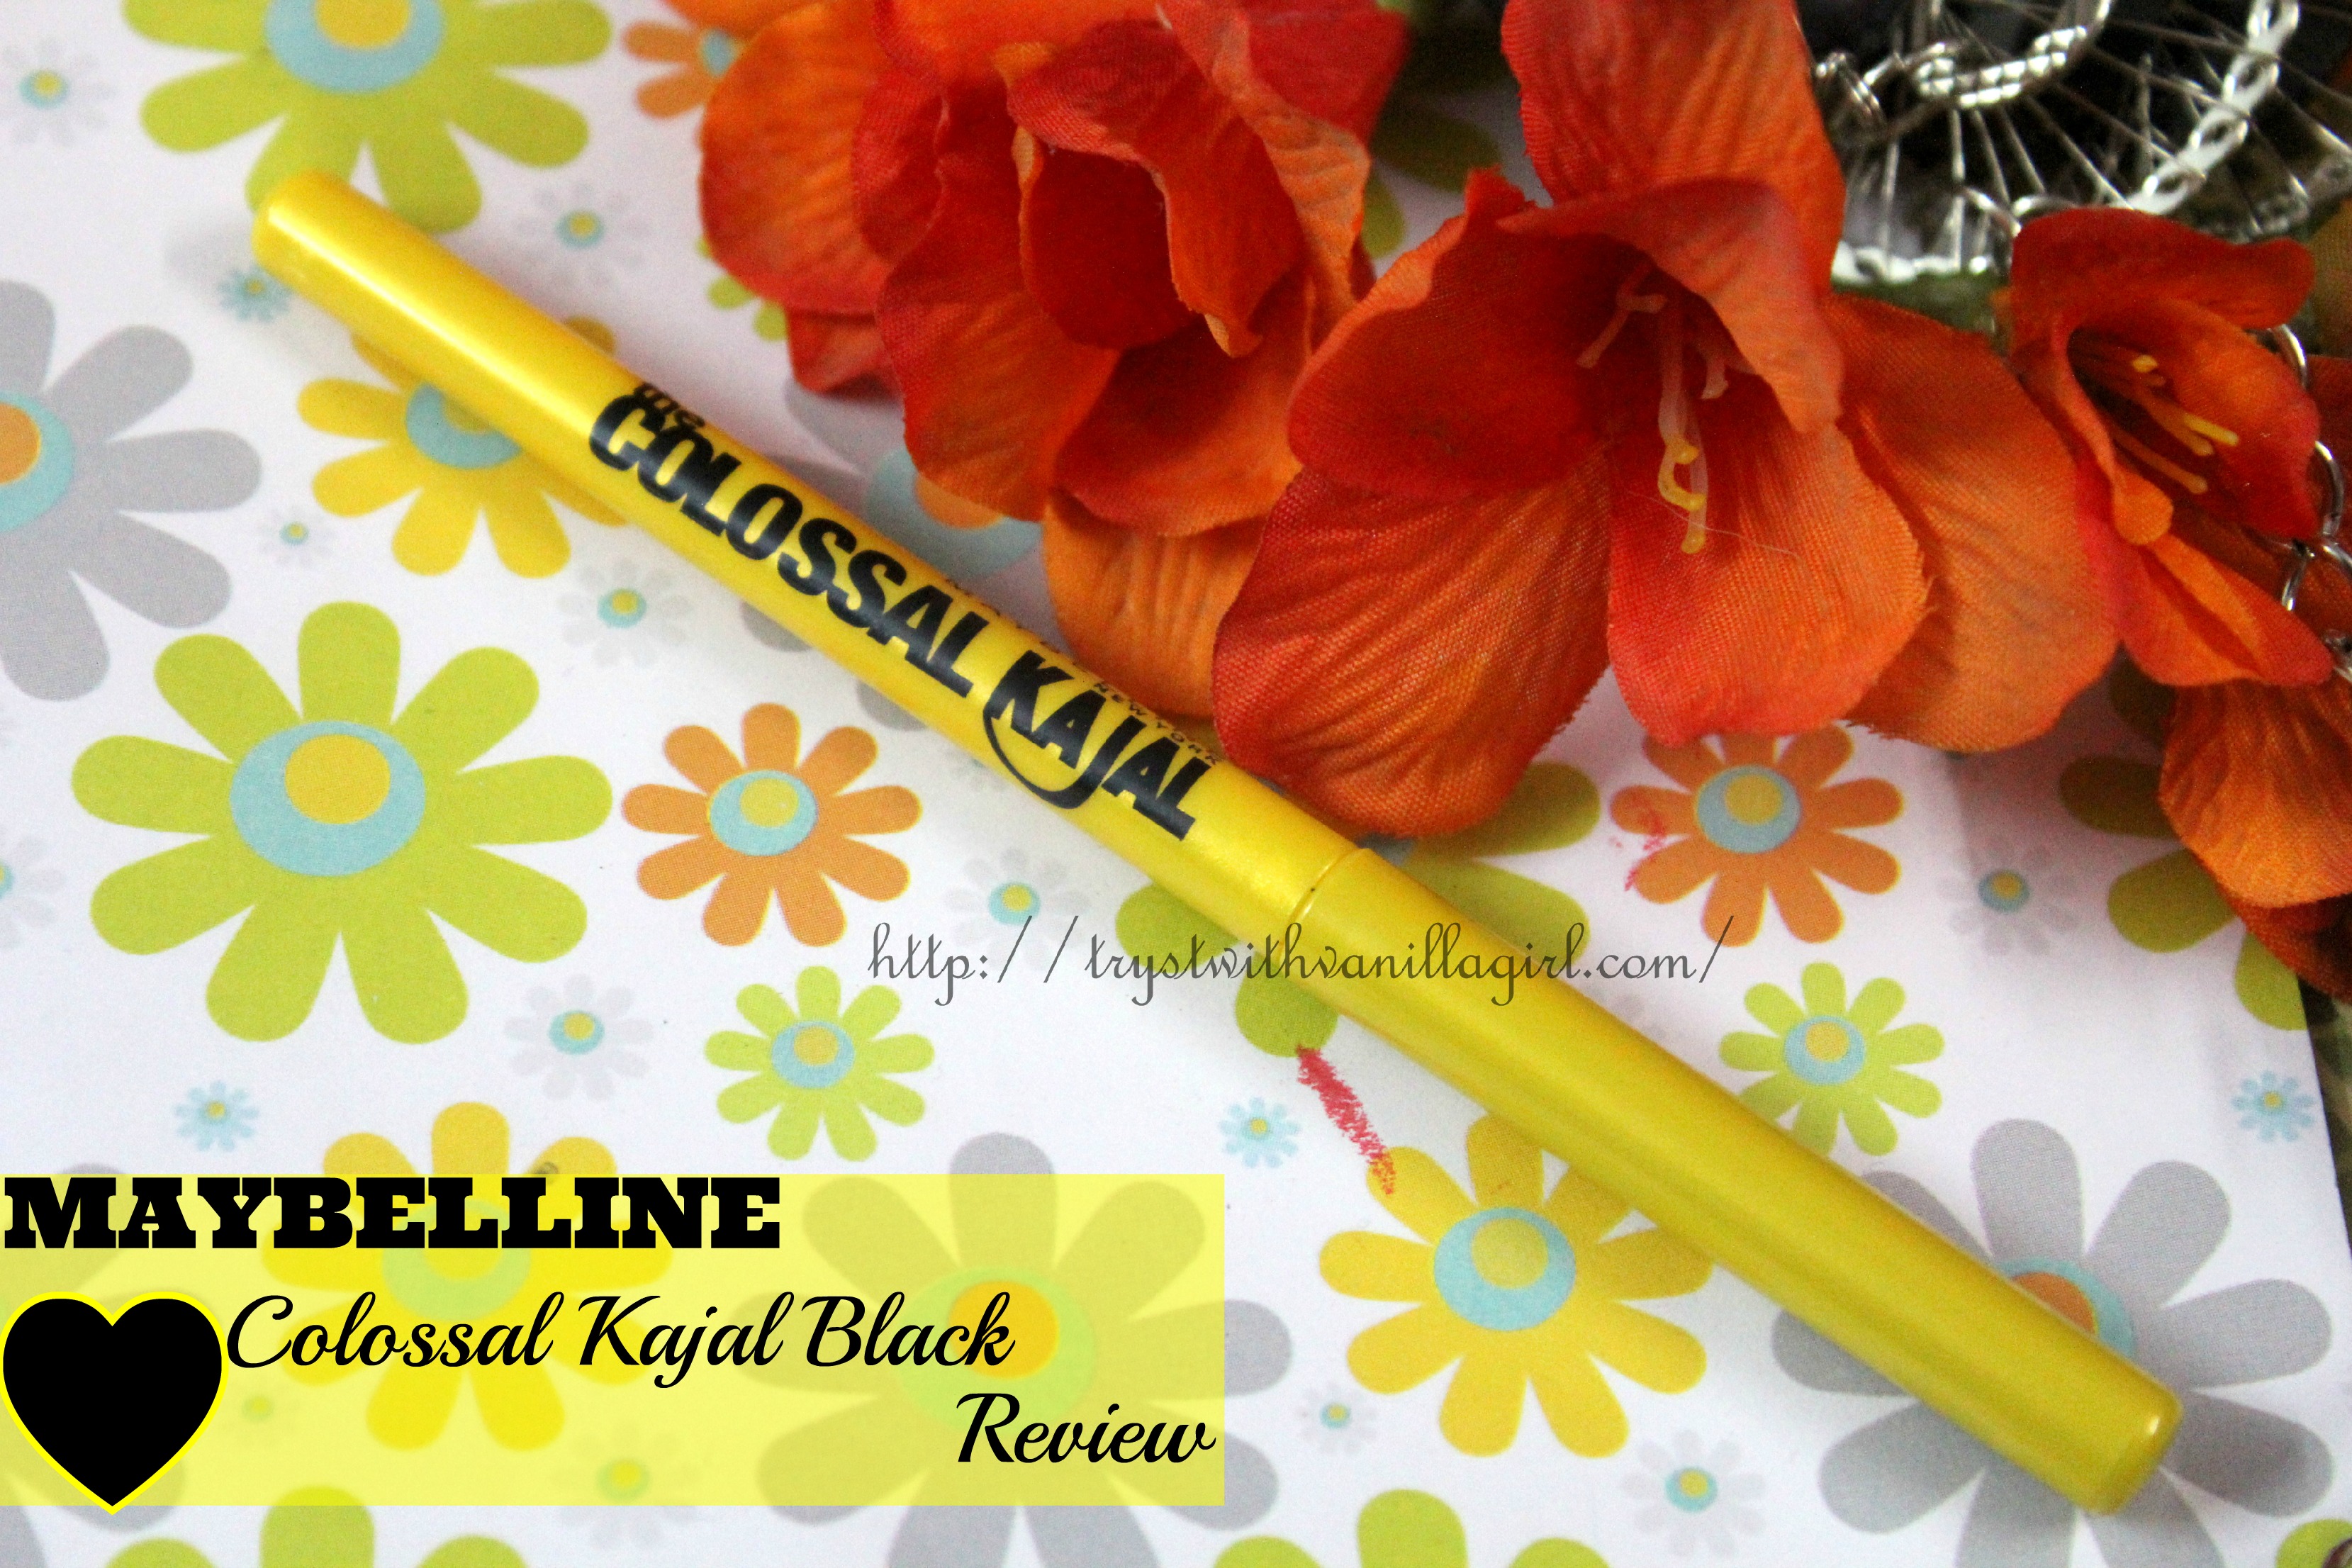 Maybelline Colossal Kajal Black Review,Swatch,Photos